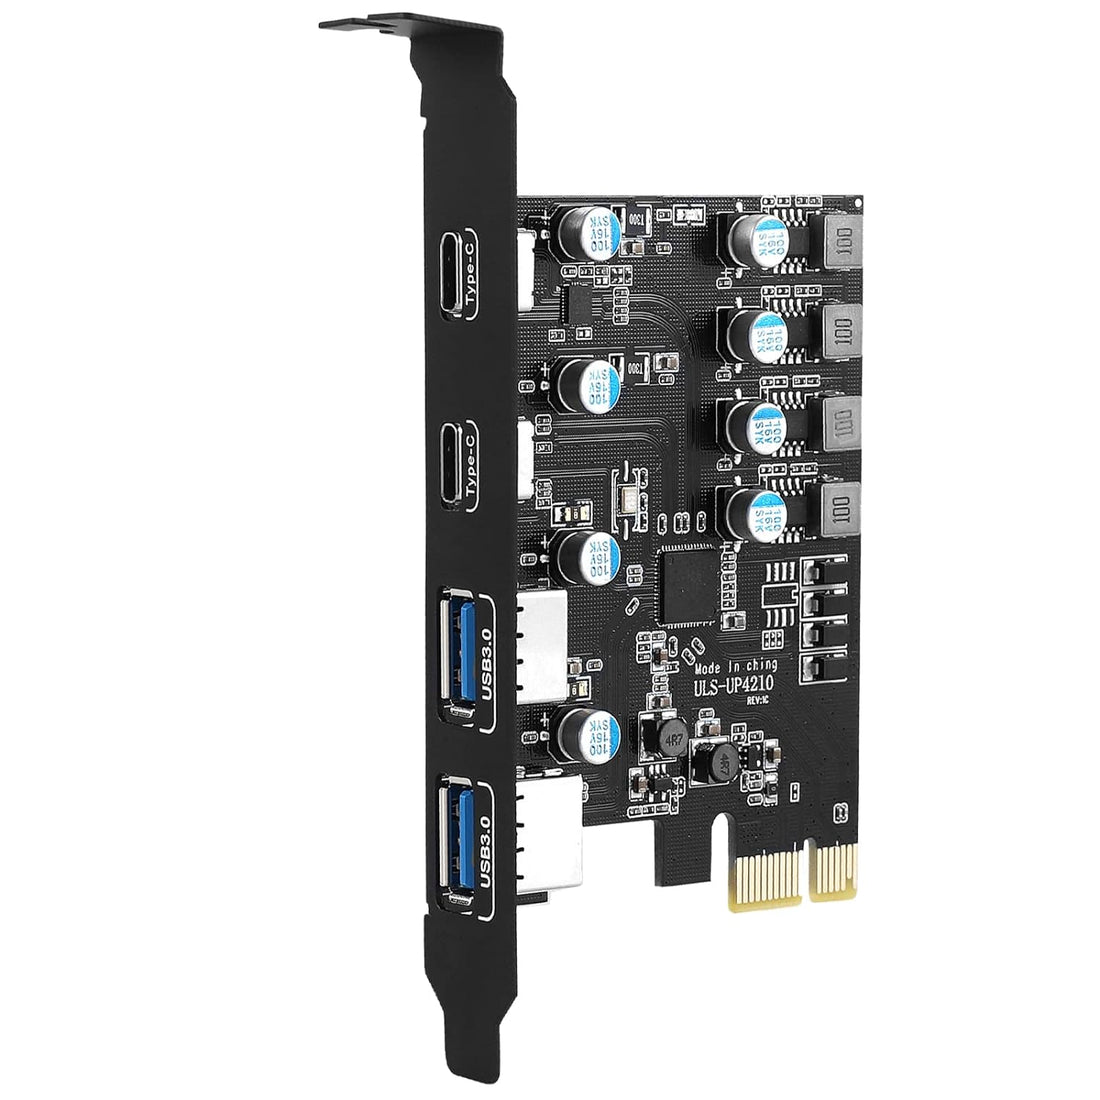 4 Ports USB 3.0 PCI Express (PCIe) Expansion Card